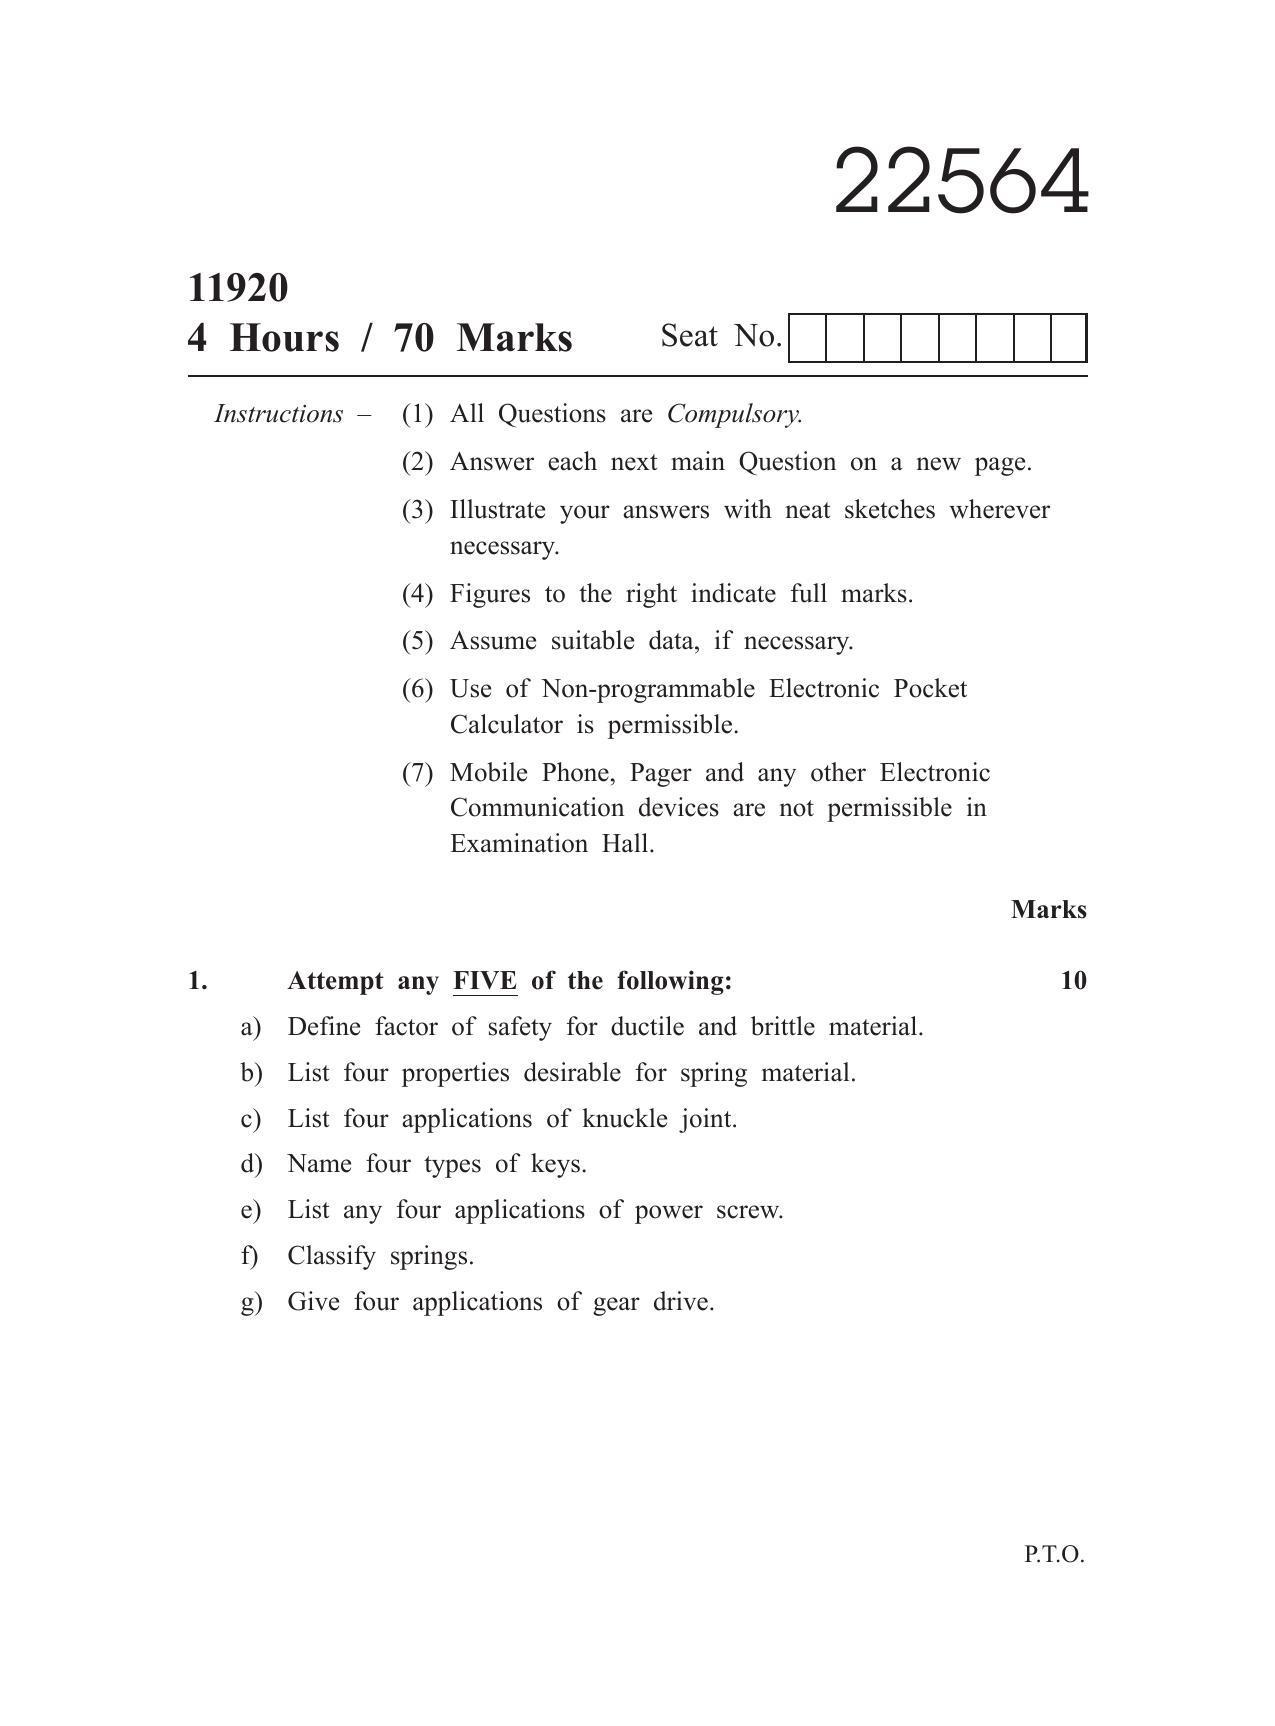 MSBTE Question Paper - 2019 - Elements of Machine Design - Page 1